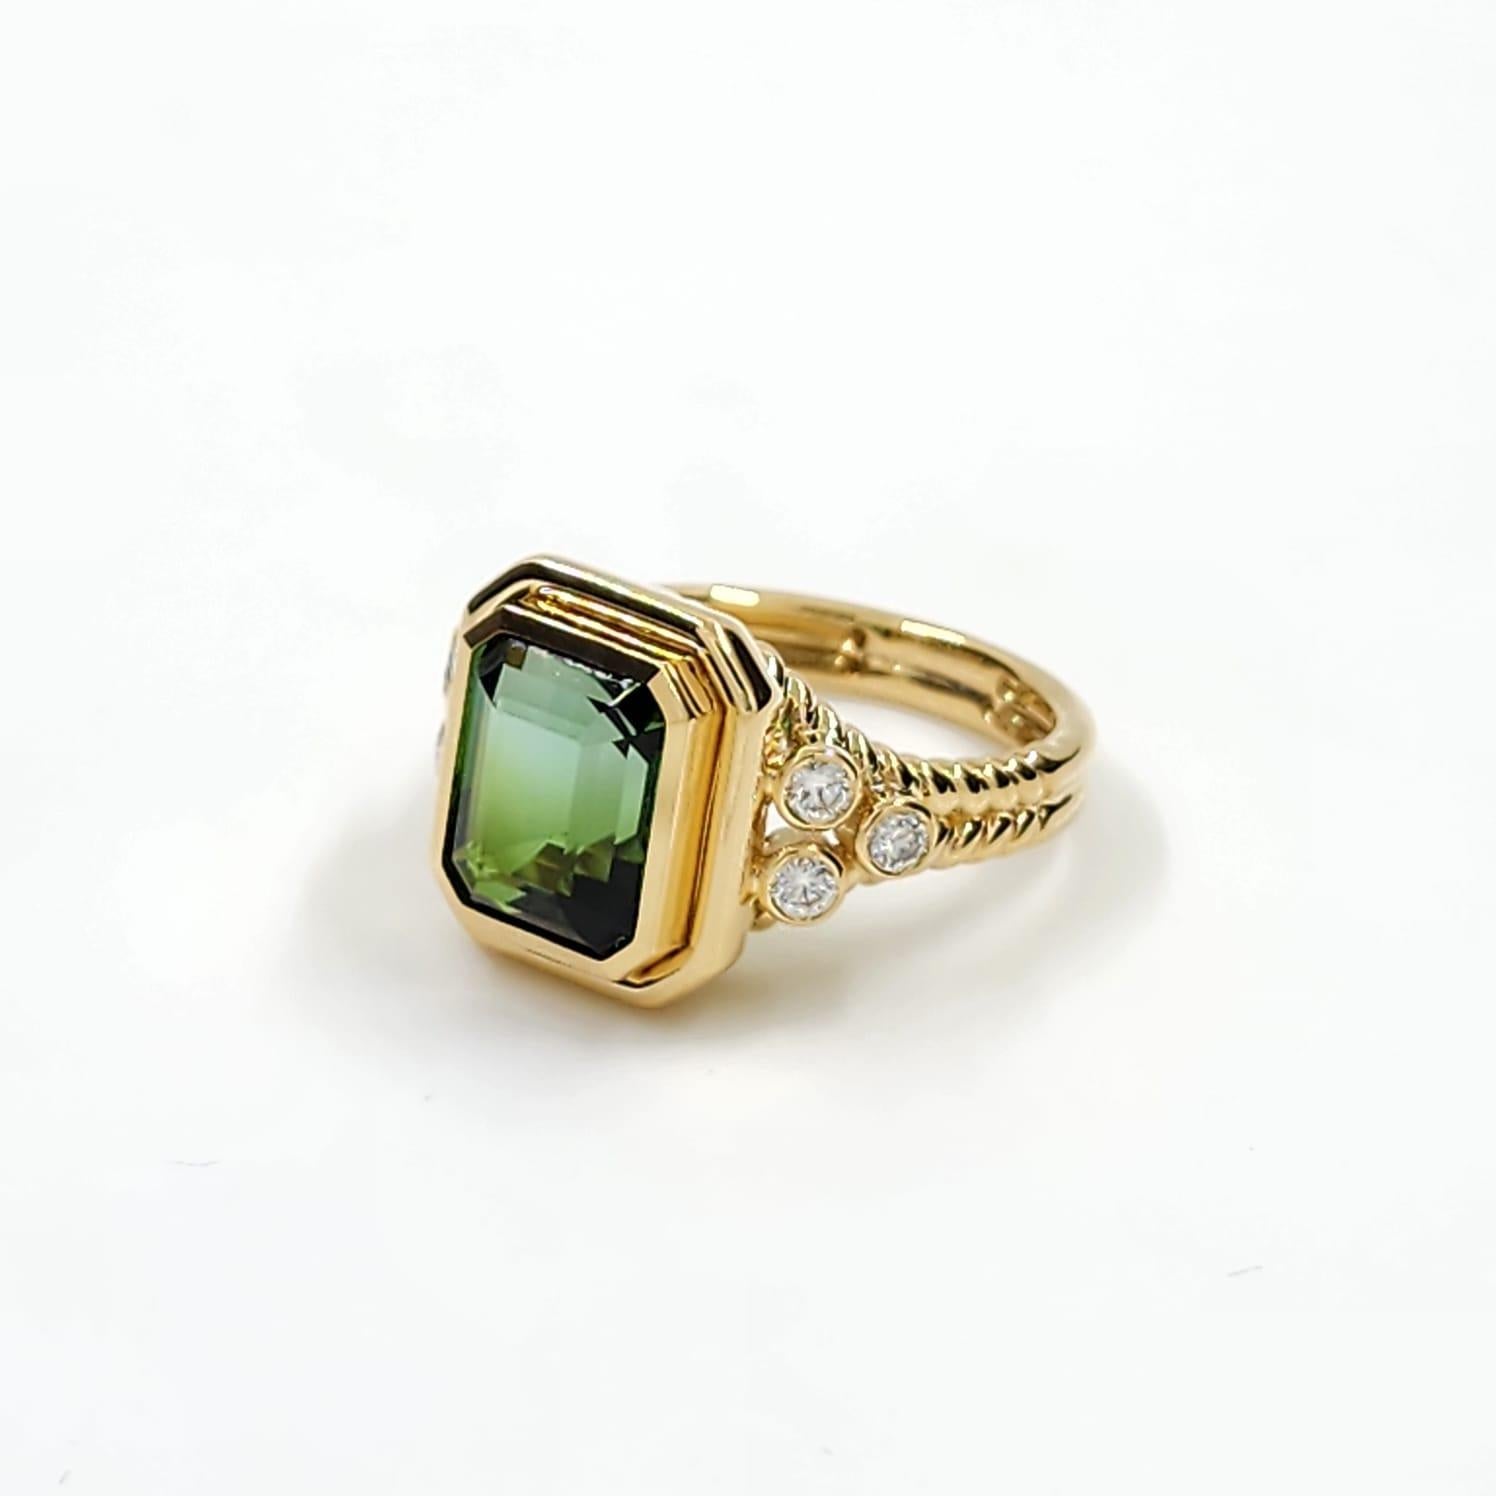 3.72 Carat Green Tourmaline Cocktail Ring in 18K Yellow Gold For Sale 2